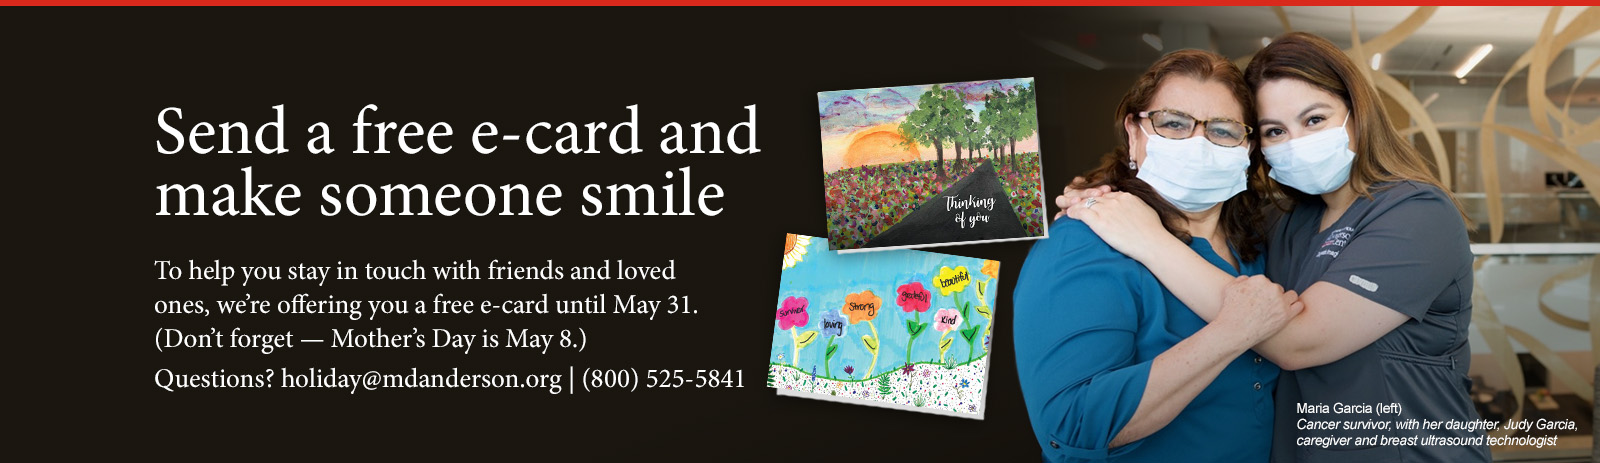 Send a free e-card and make someone smile. We are offering you a free e-card until May 31. Dont forget - Mothers Day is May 8